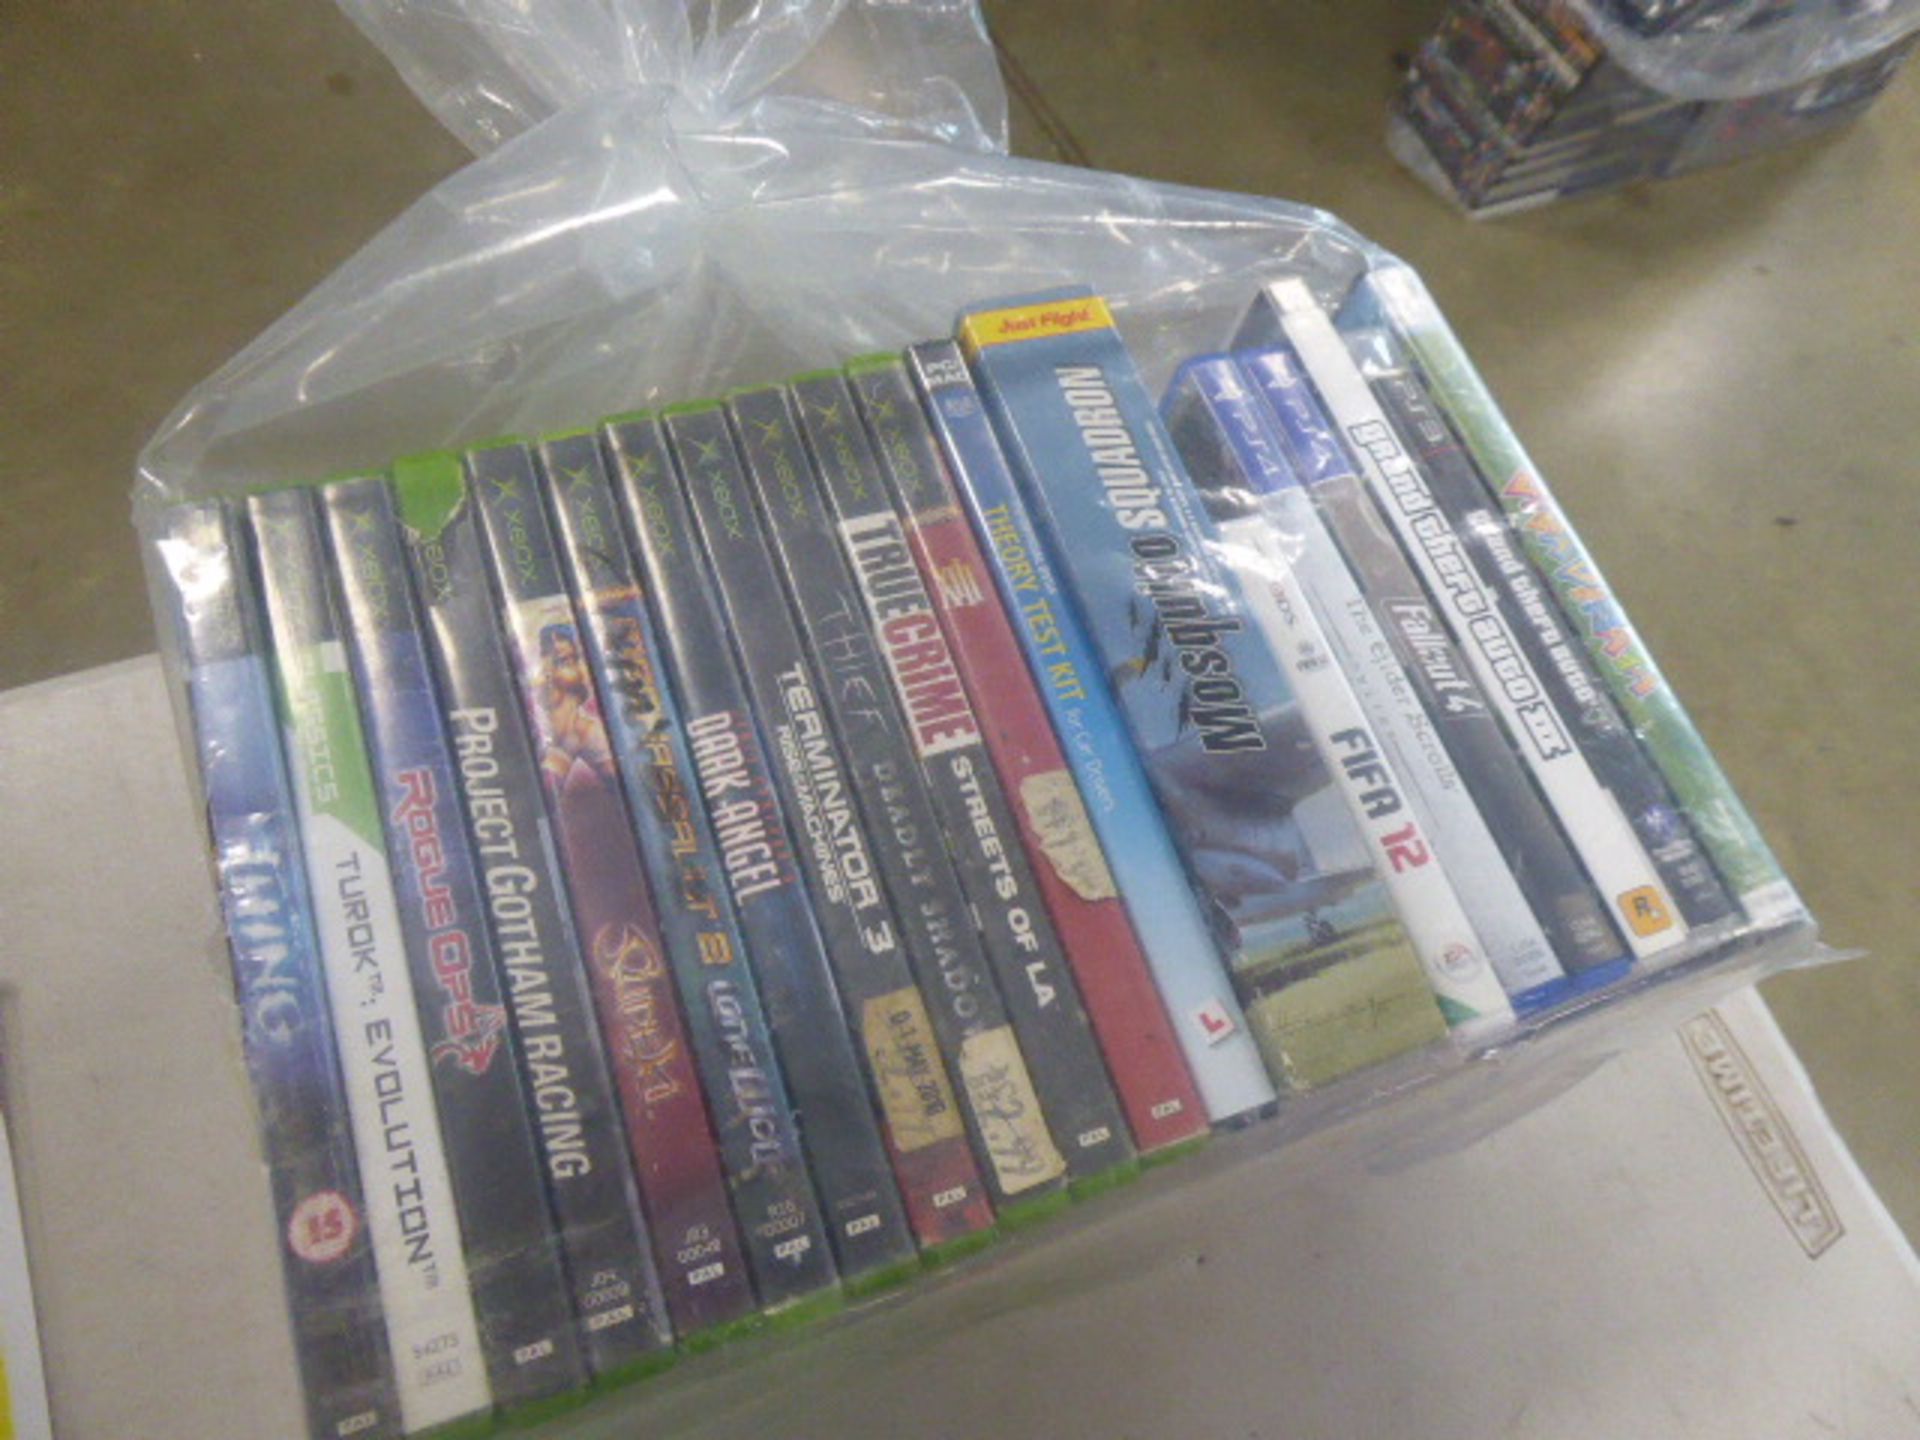 Bag containing a quantity of console games, 1st gen Xbox games, PC games, etc